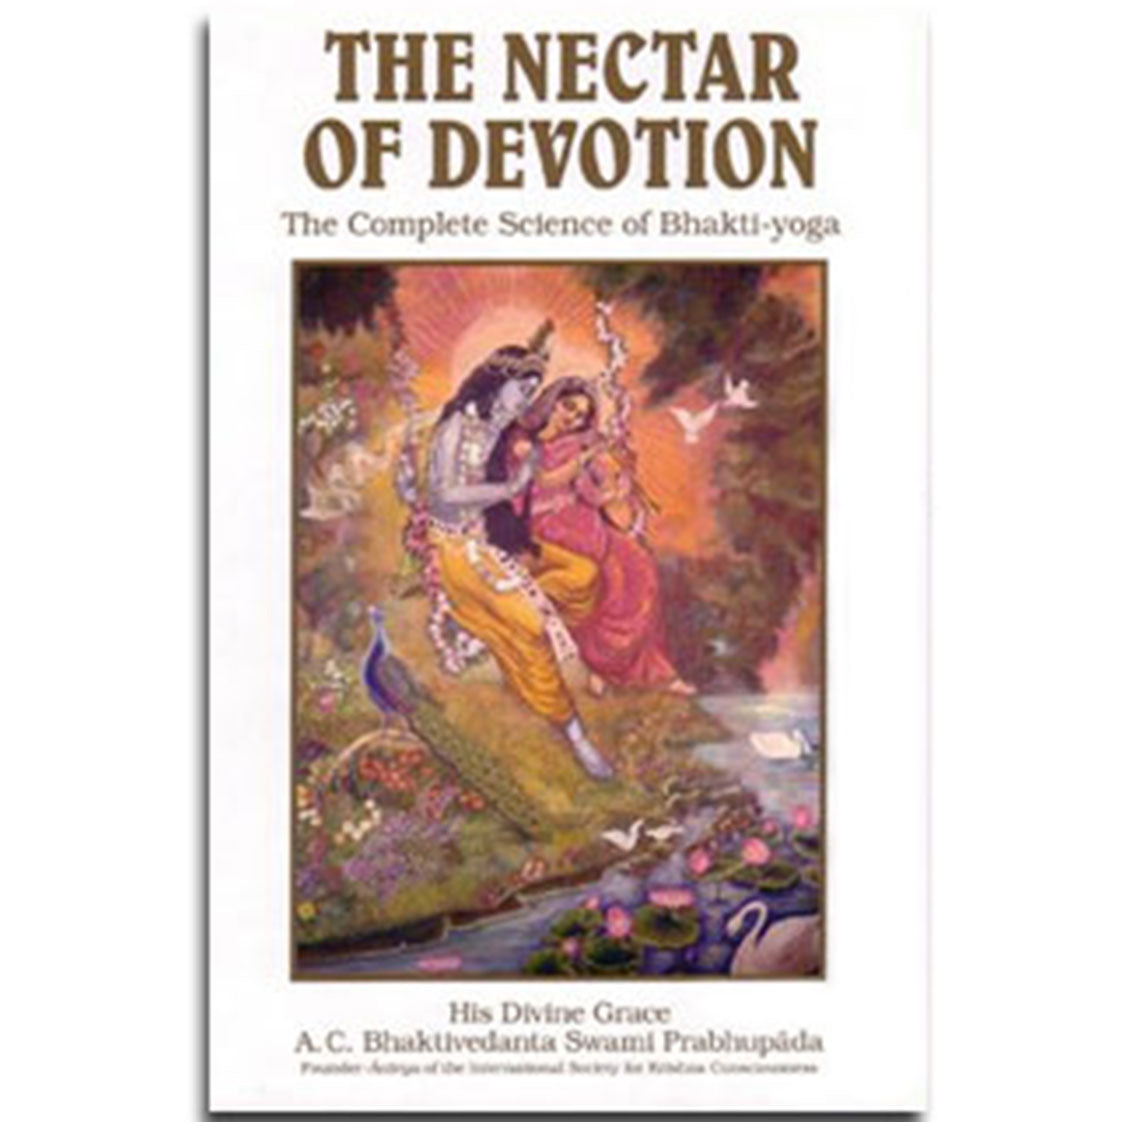 The Nectar of Devotion - 1972 Edition - Hard Cover